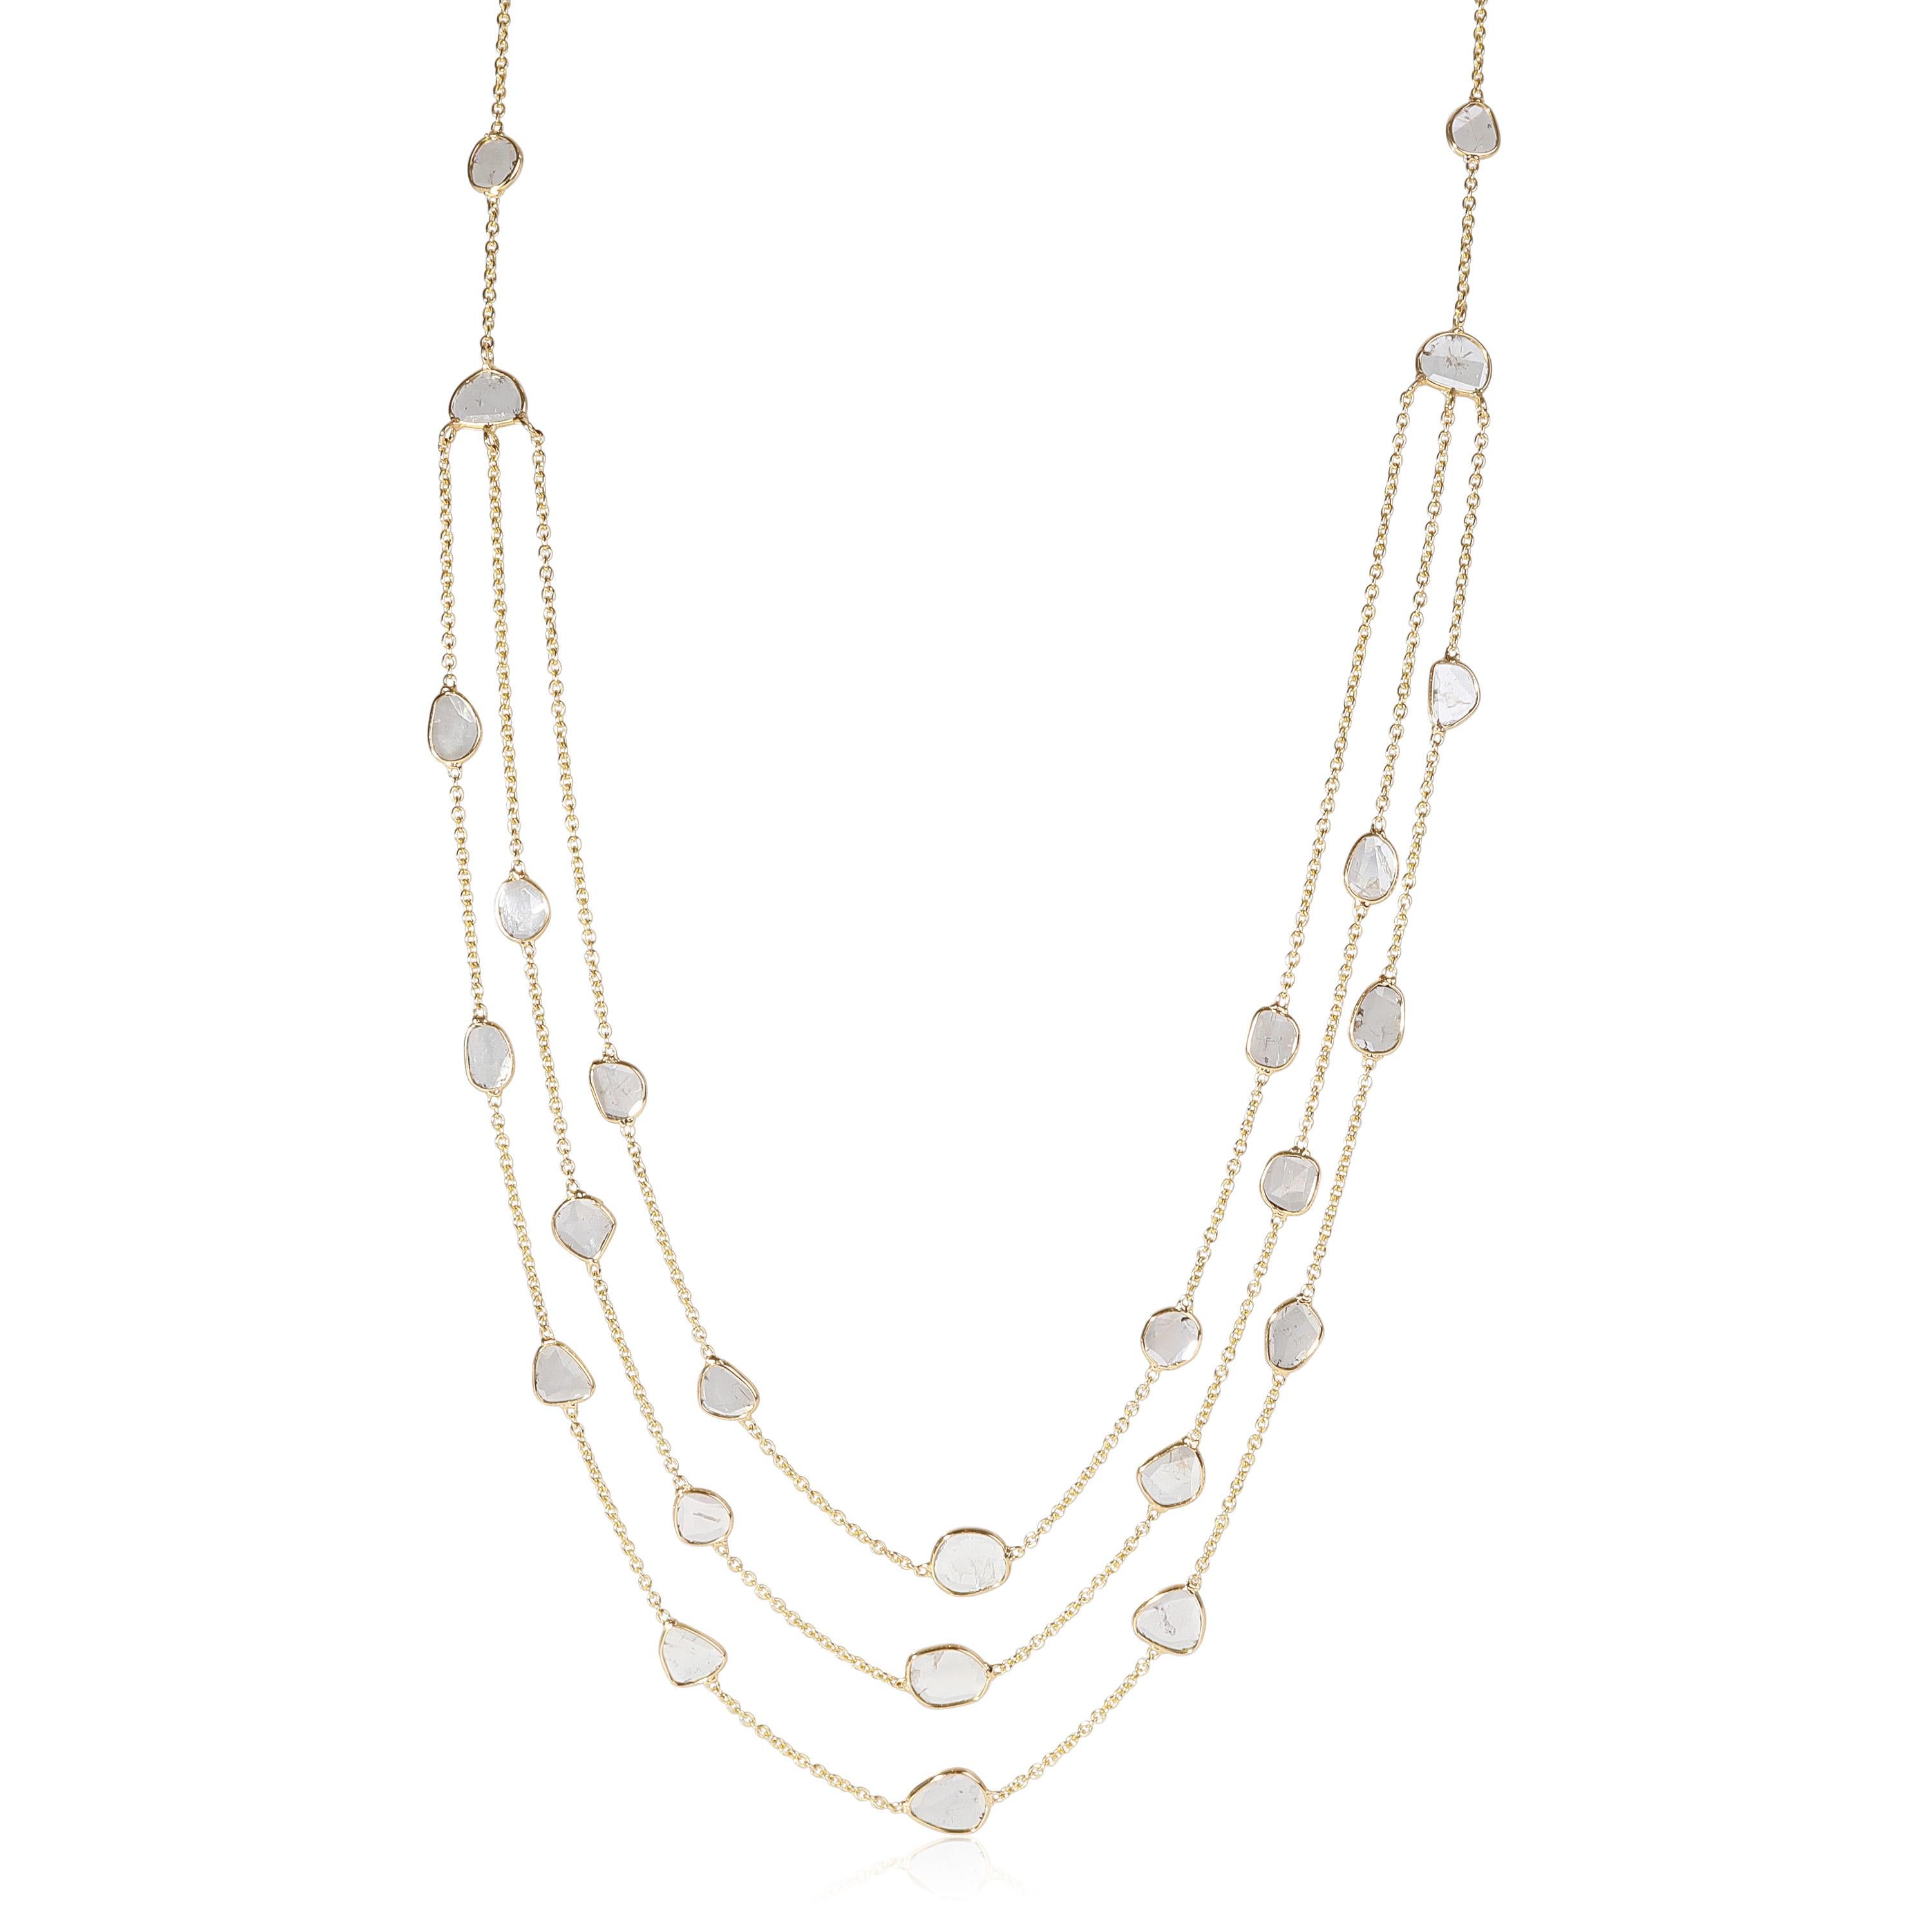 Diamond Slices Three Layered Drape Necklace in 18K Yellow Gold 2.85 Ctw

PRIMARY DETAILS
SKU: 120803
Listing Title: Diamond Slices Three Layered Drape Necklace in 18K Yellow Gold 2.85 Ctw
Condition Description: Retails for 2995 USD. Never Worn /